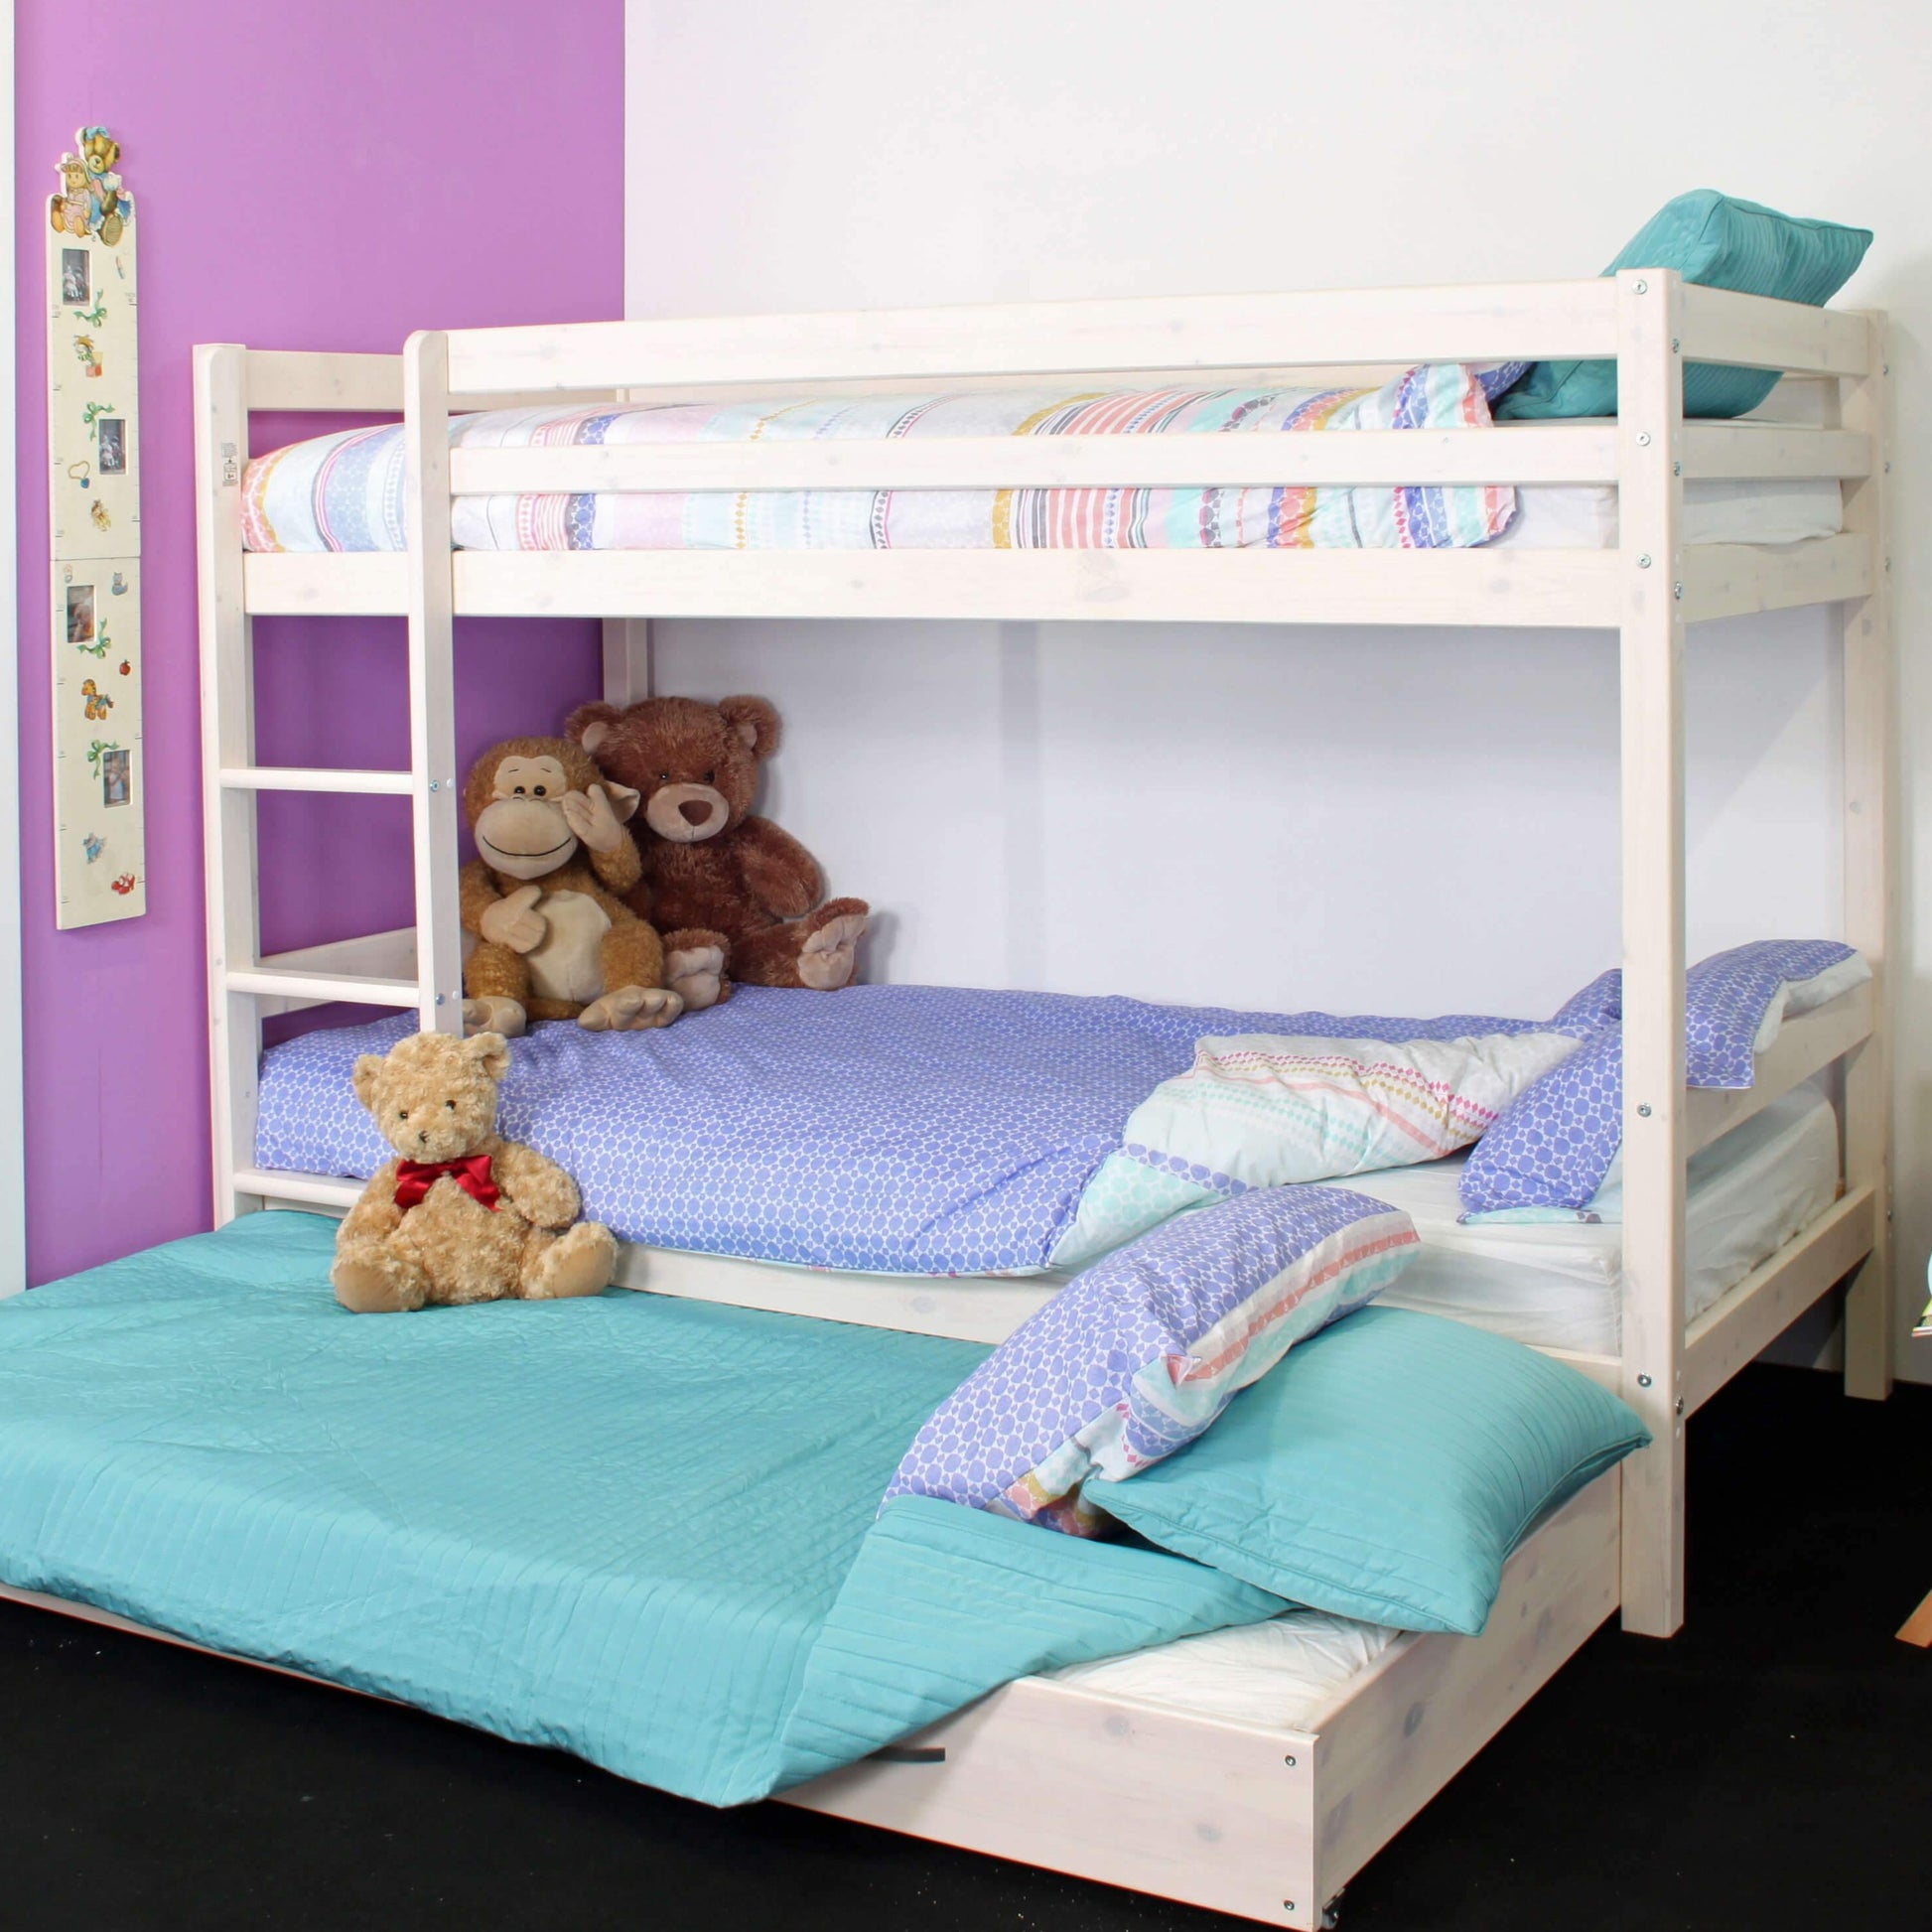 Thuka hit 5 bunk bed with guest trundle bed extended